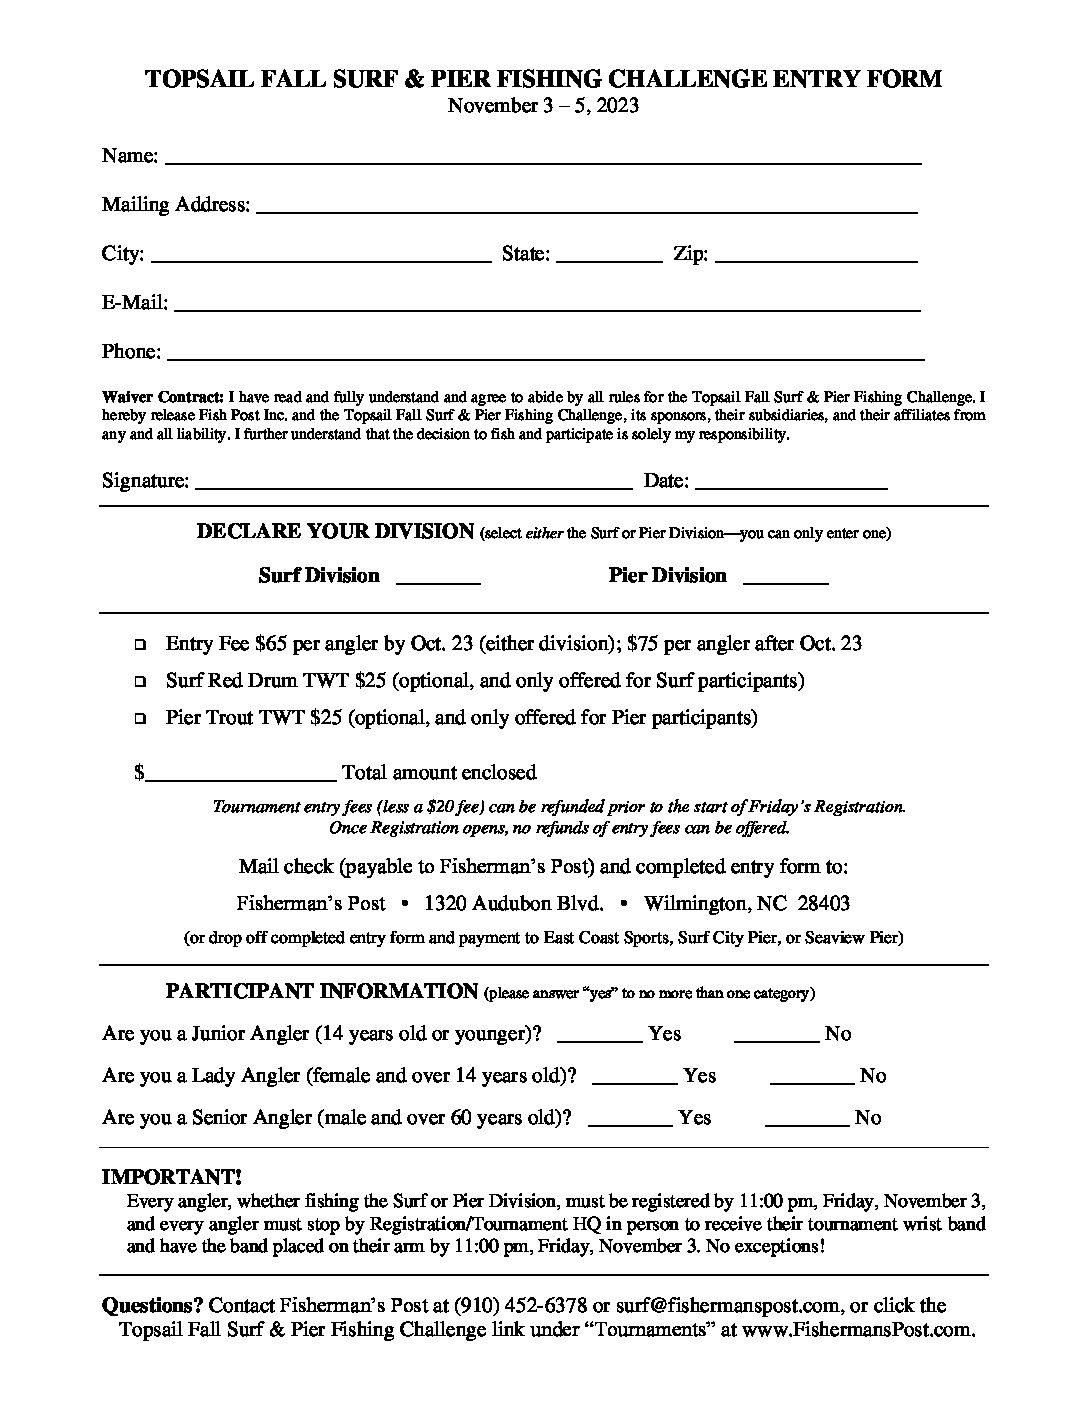 2023 Topsail Fall Surf & Pier Fishing Challenge Print Entry Form